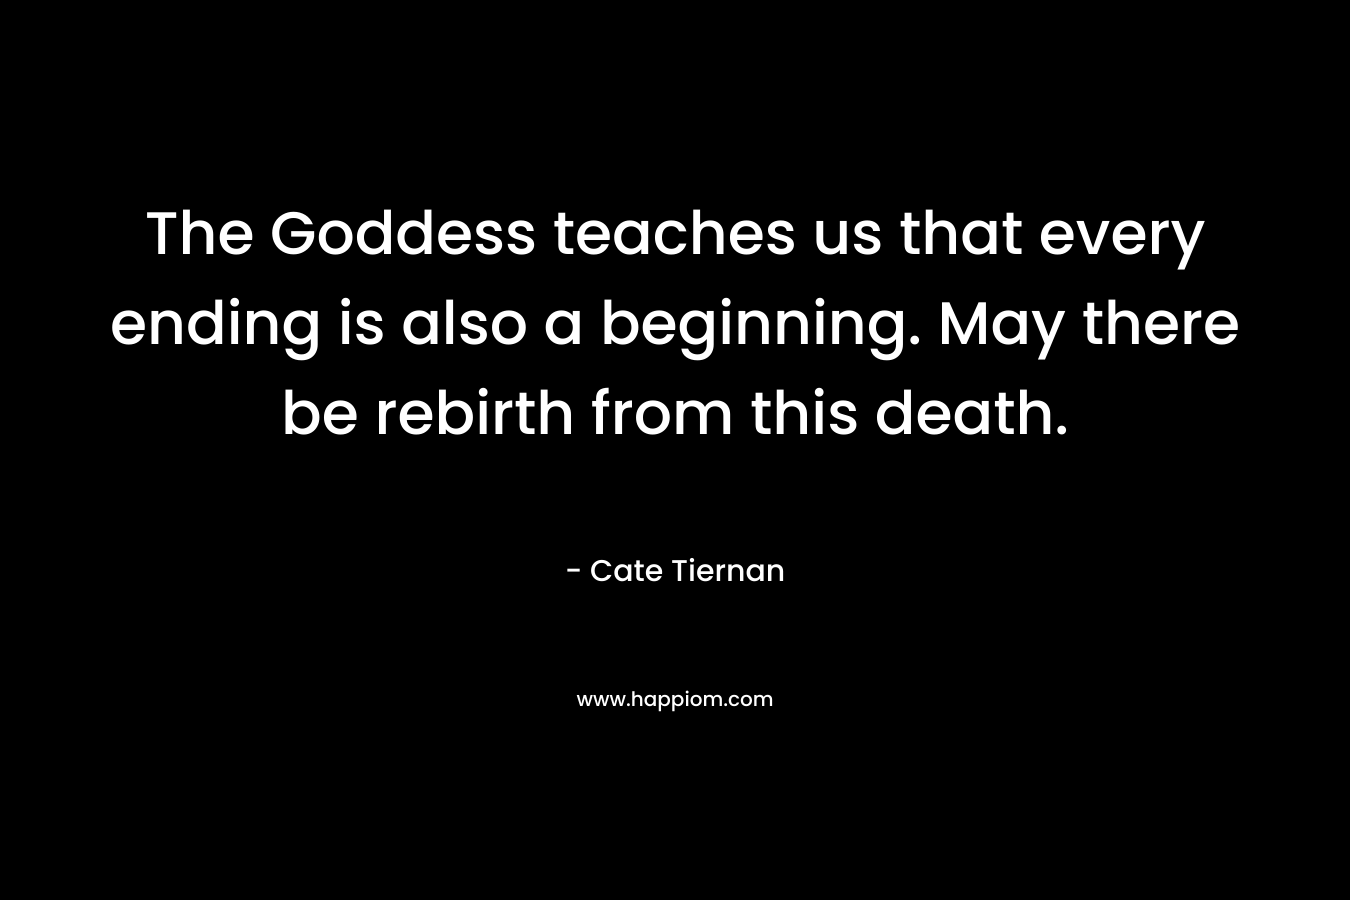 The Goddess teaches us that every ending is also a beginning. May there be rebirth from this death. – Cate Tiernan